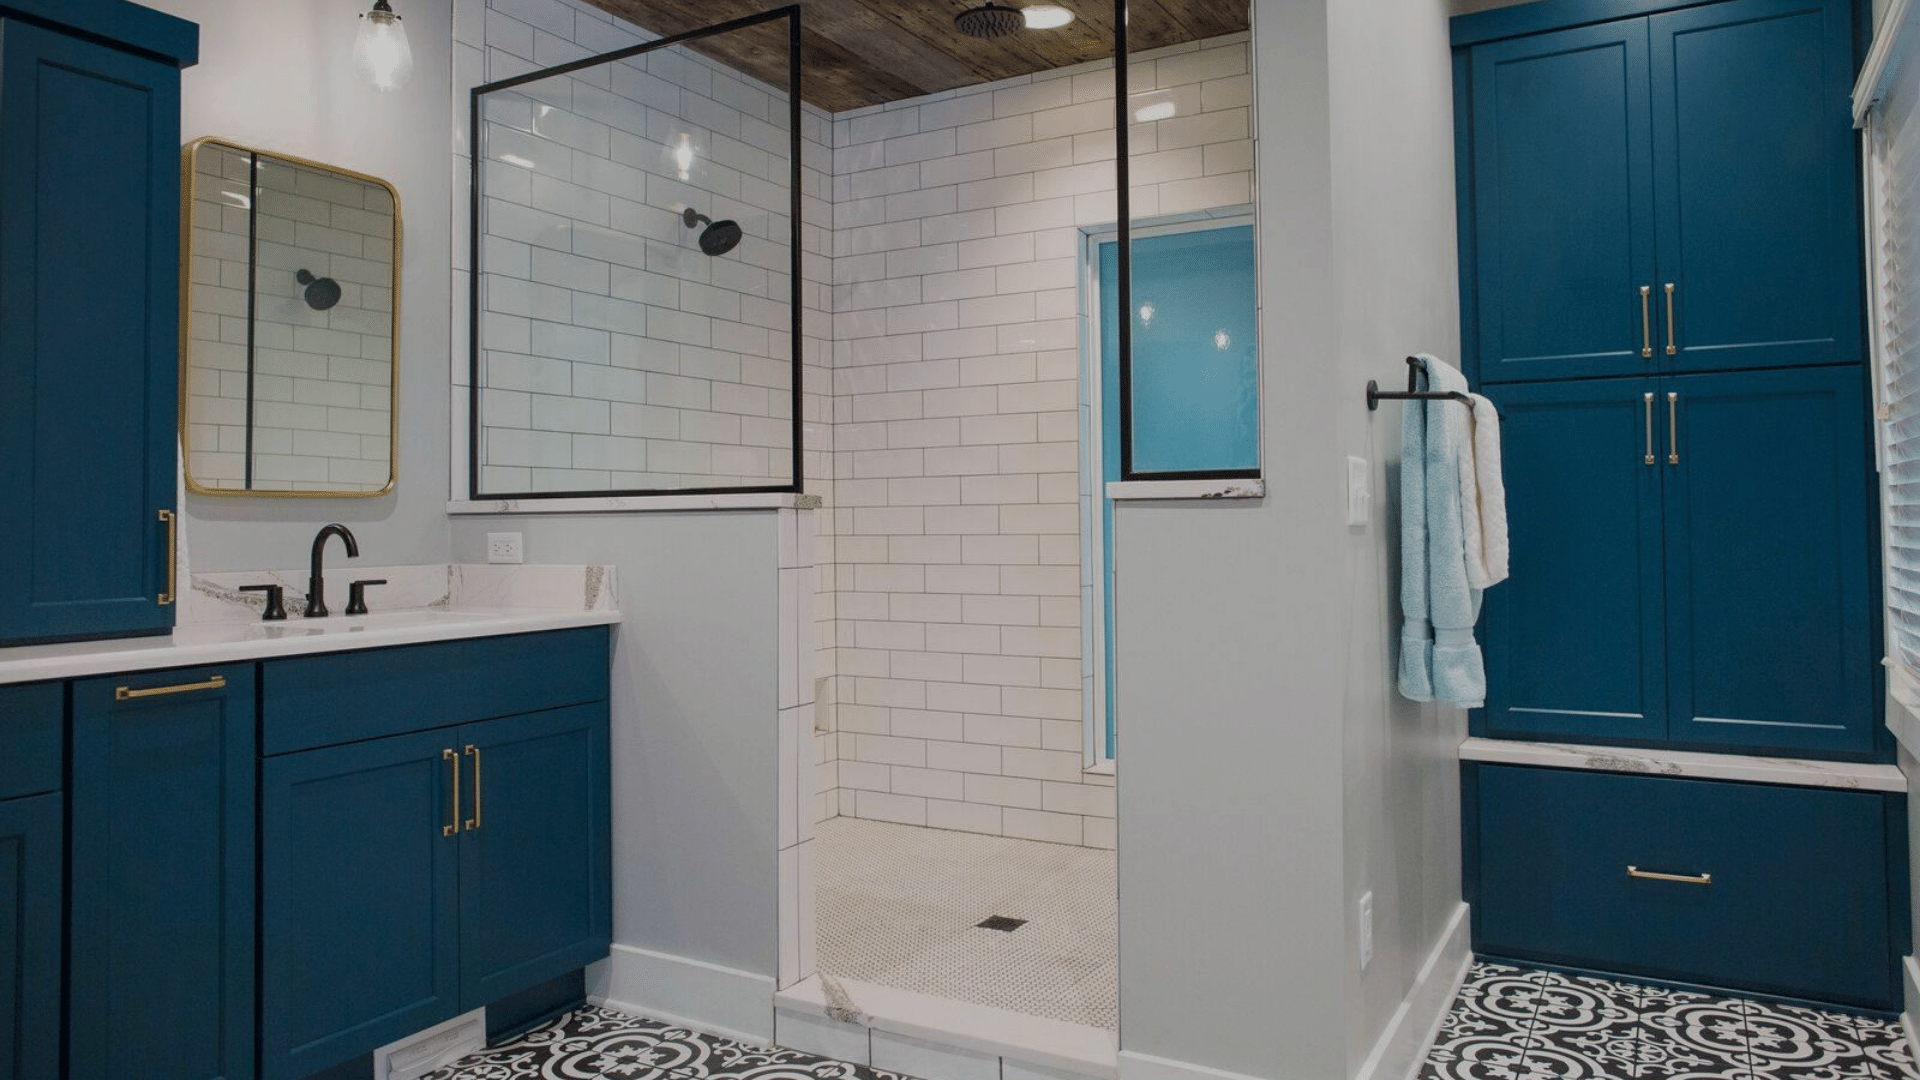 Bathroom Remodeling Services in Des Moines Iowa